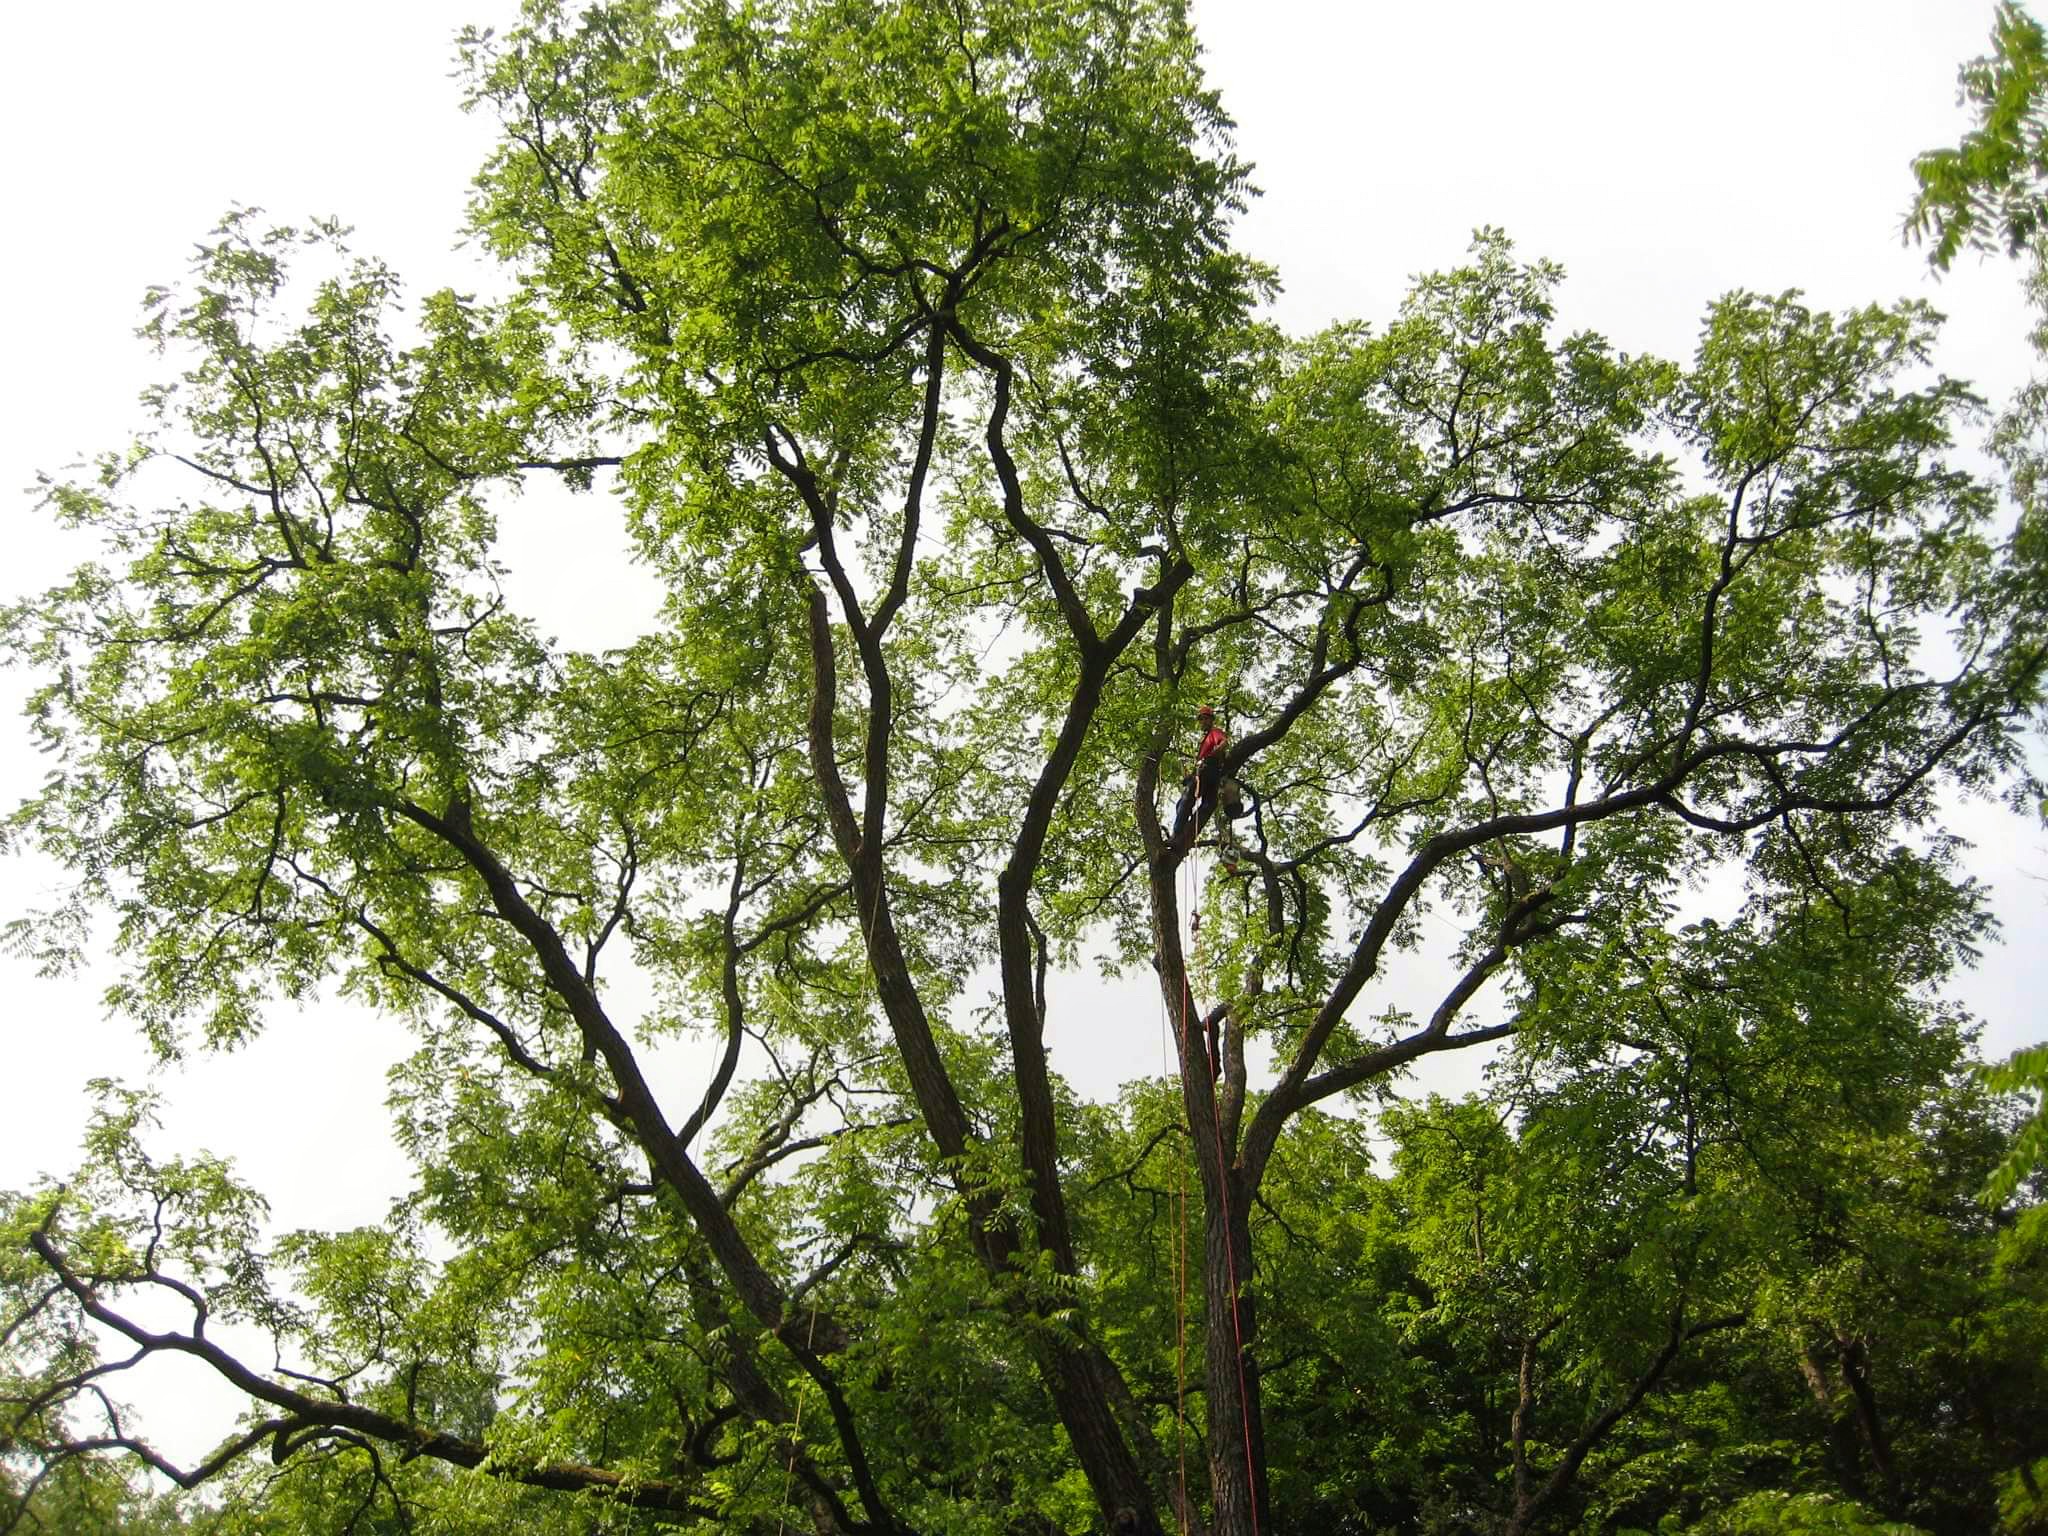 Pruning cabling a large black walnut tree